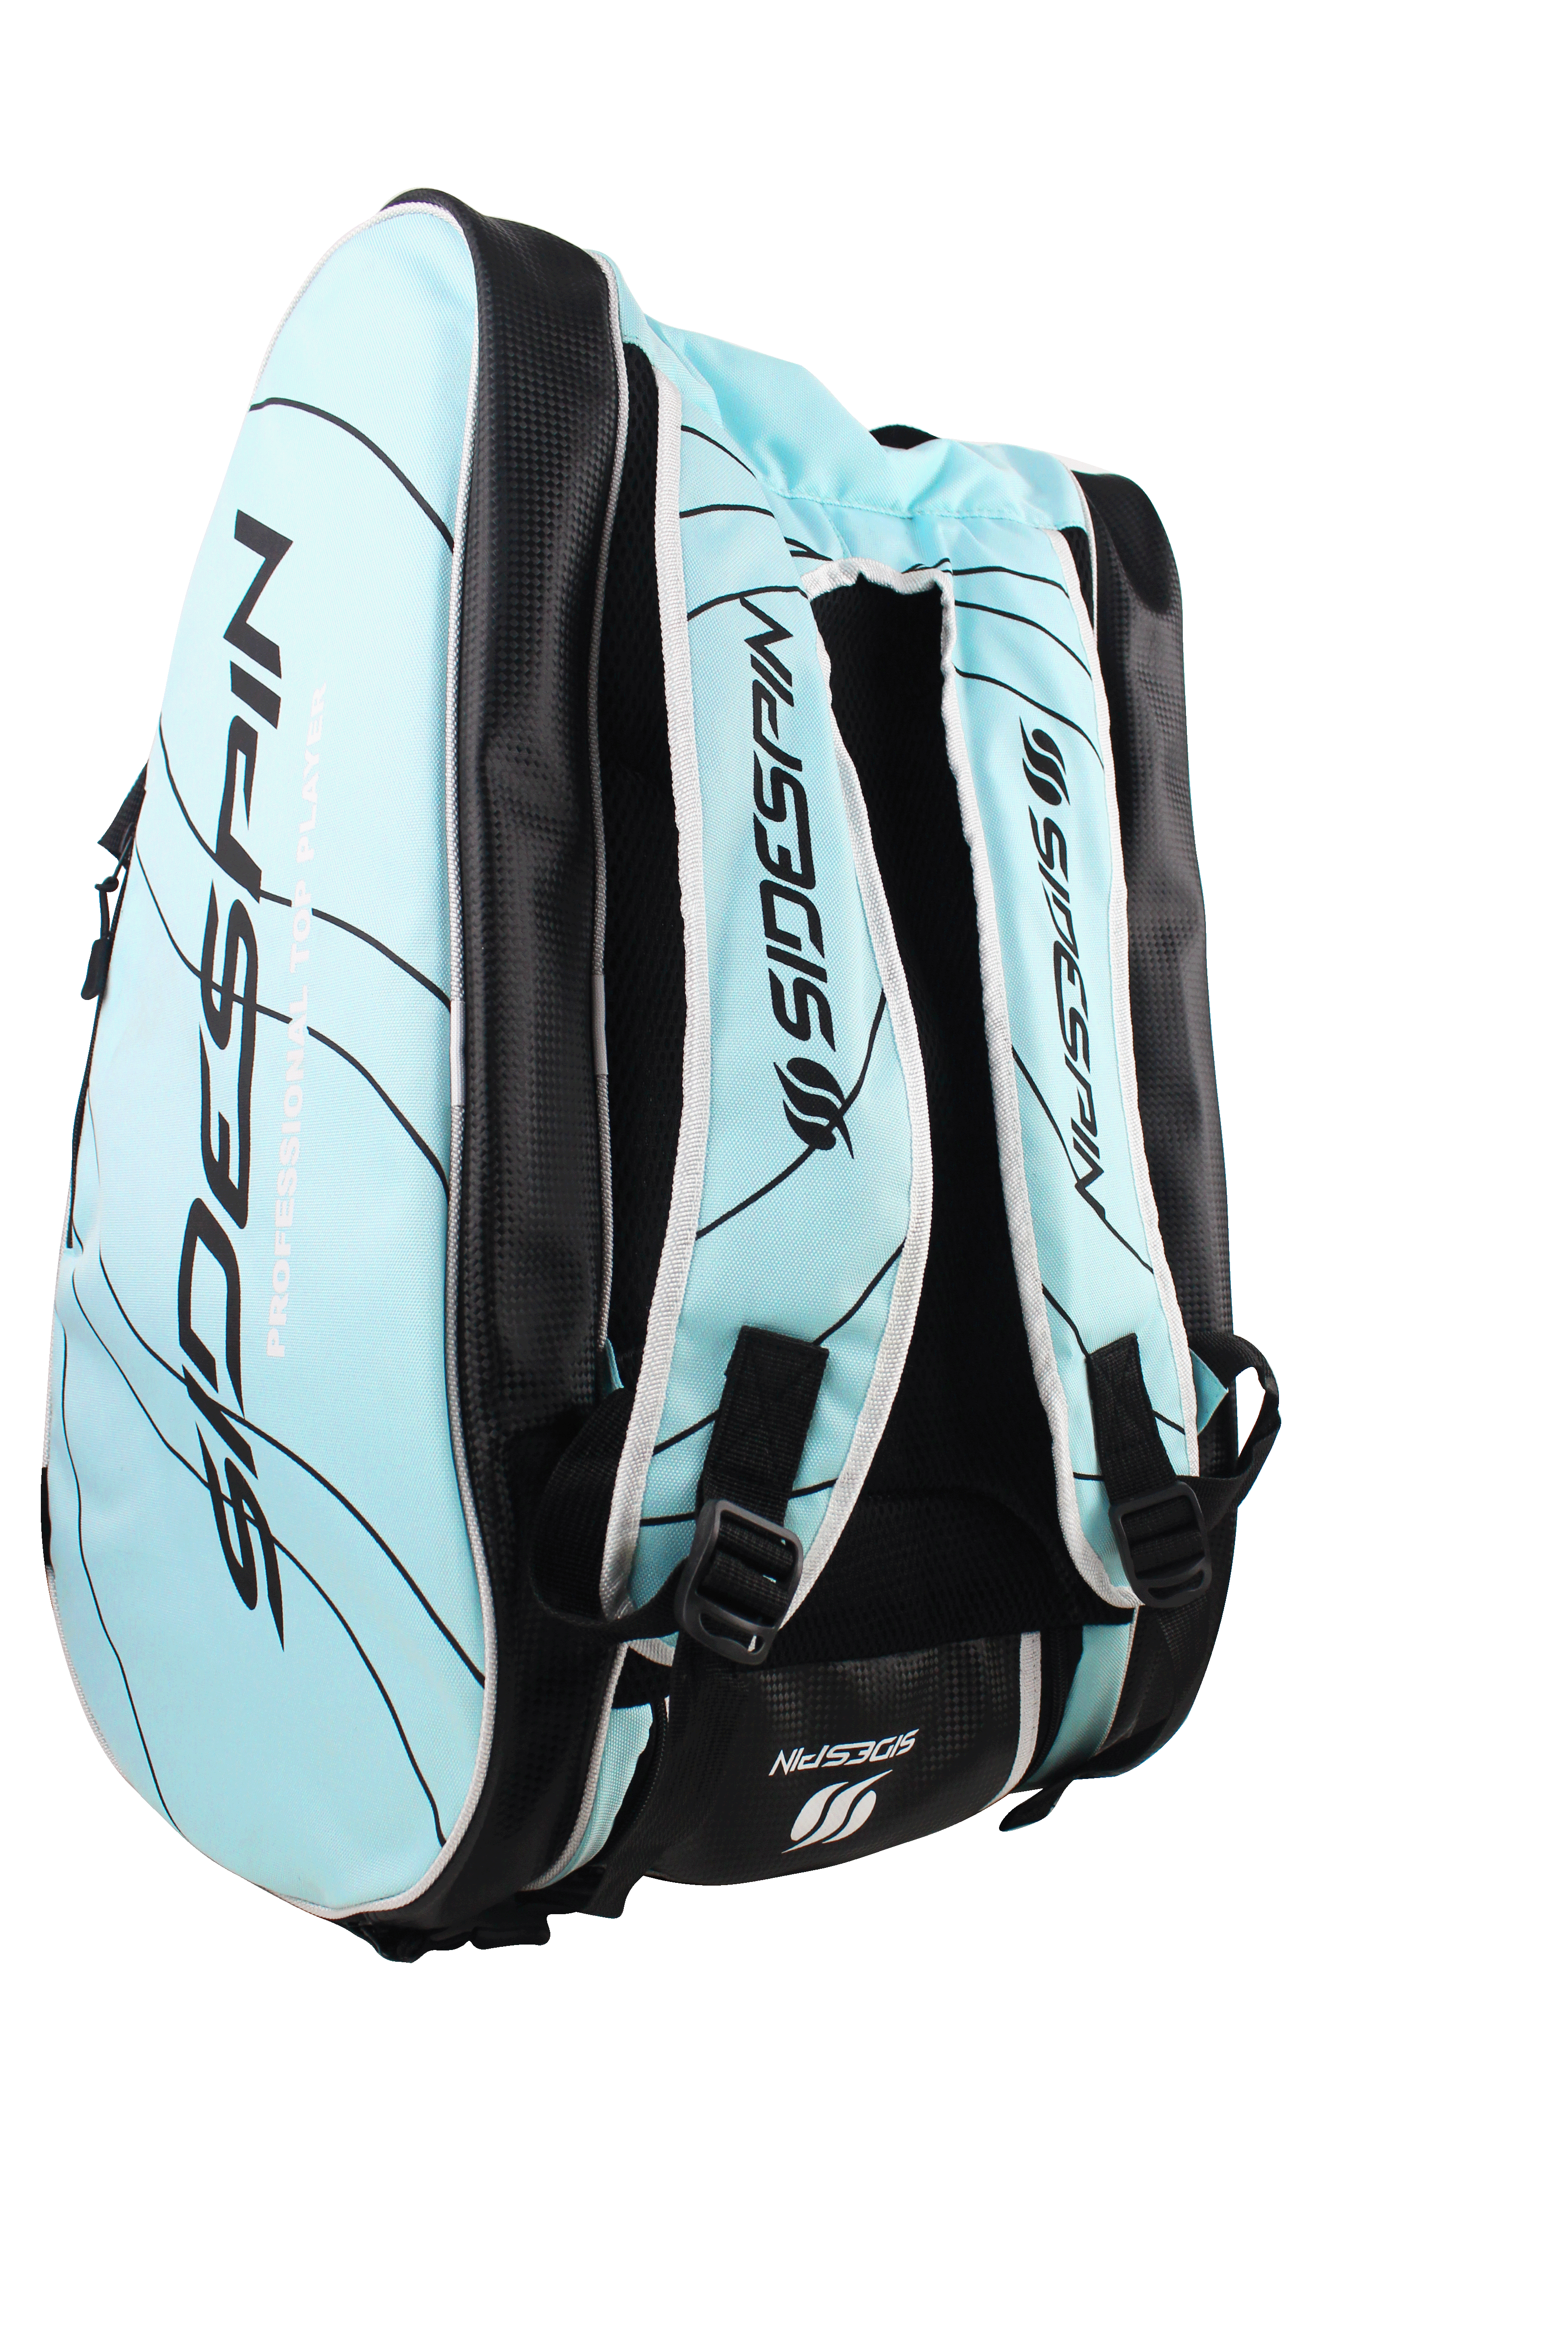 TOP PLAYER DOUBLE PROFESSIONAL PADEL BAG